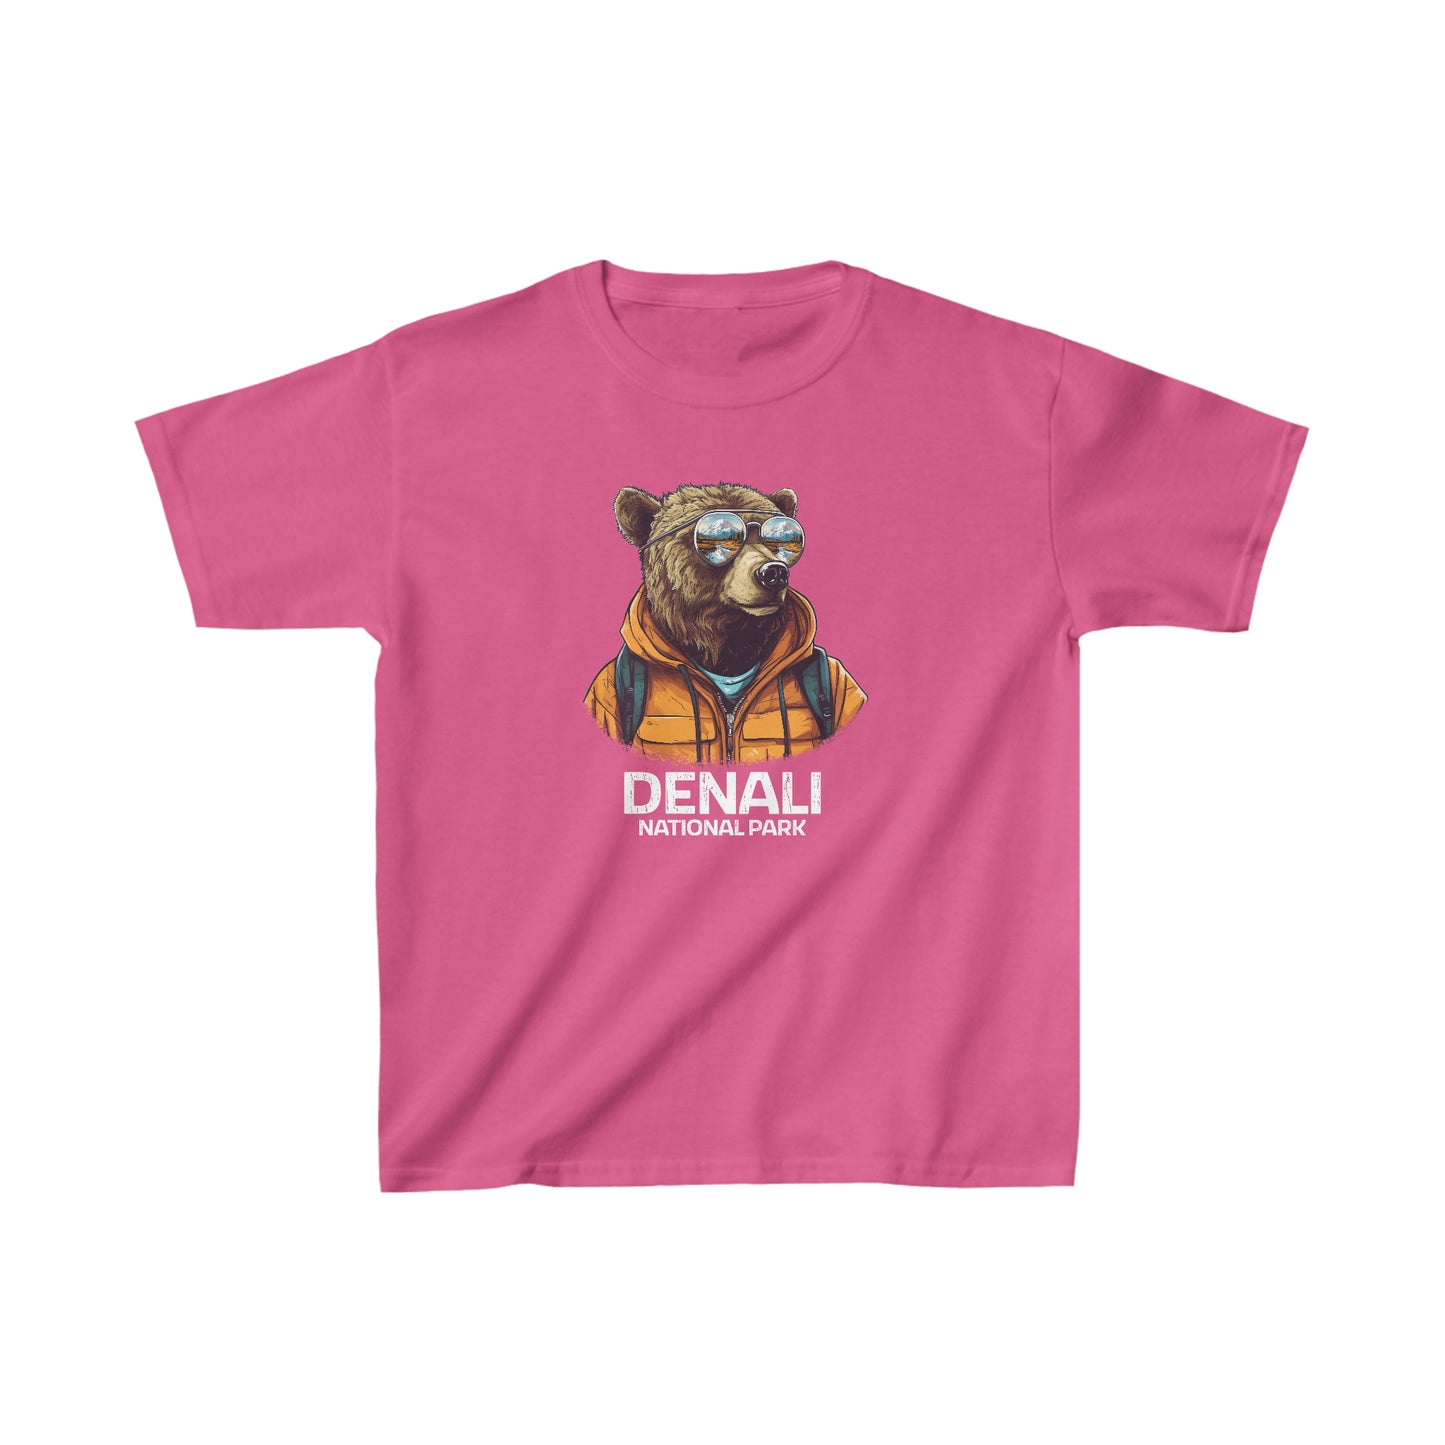 Denali National Park Child T-Shirt - Cool Grizzly Bear